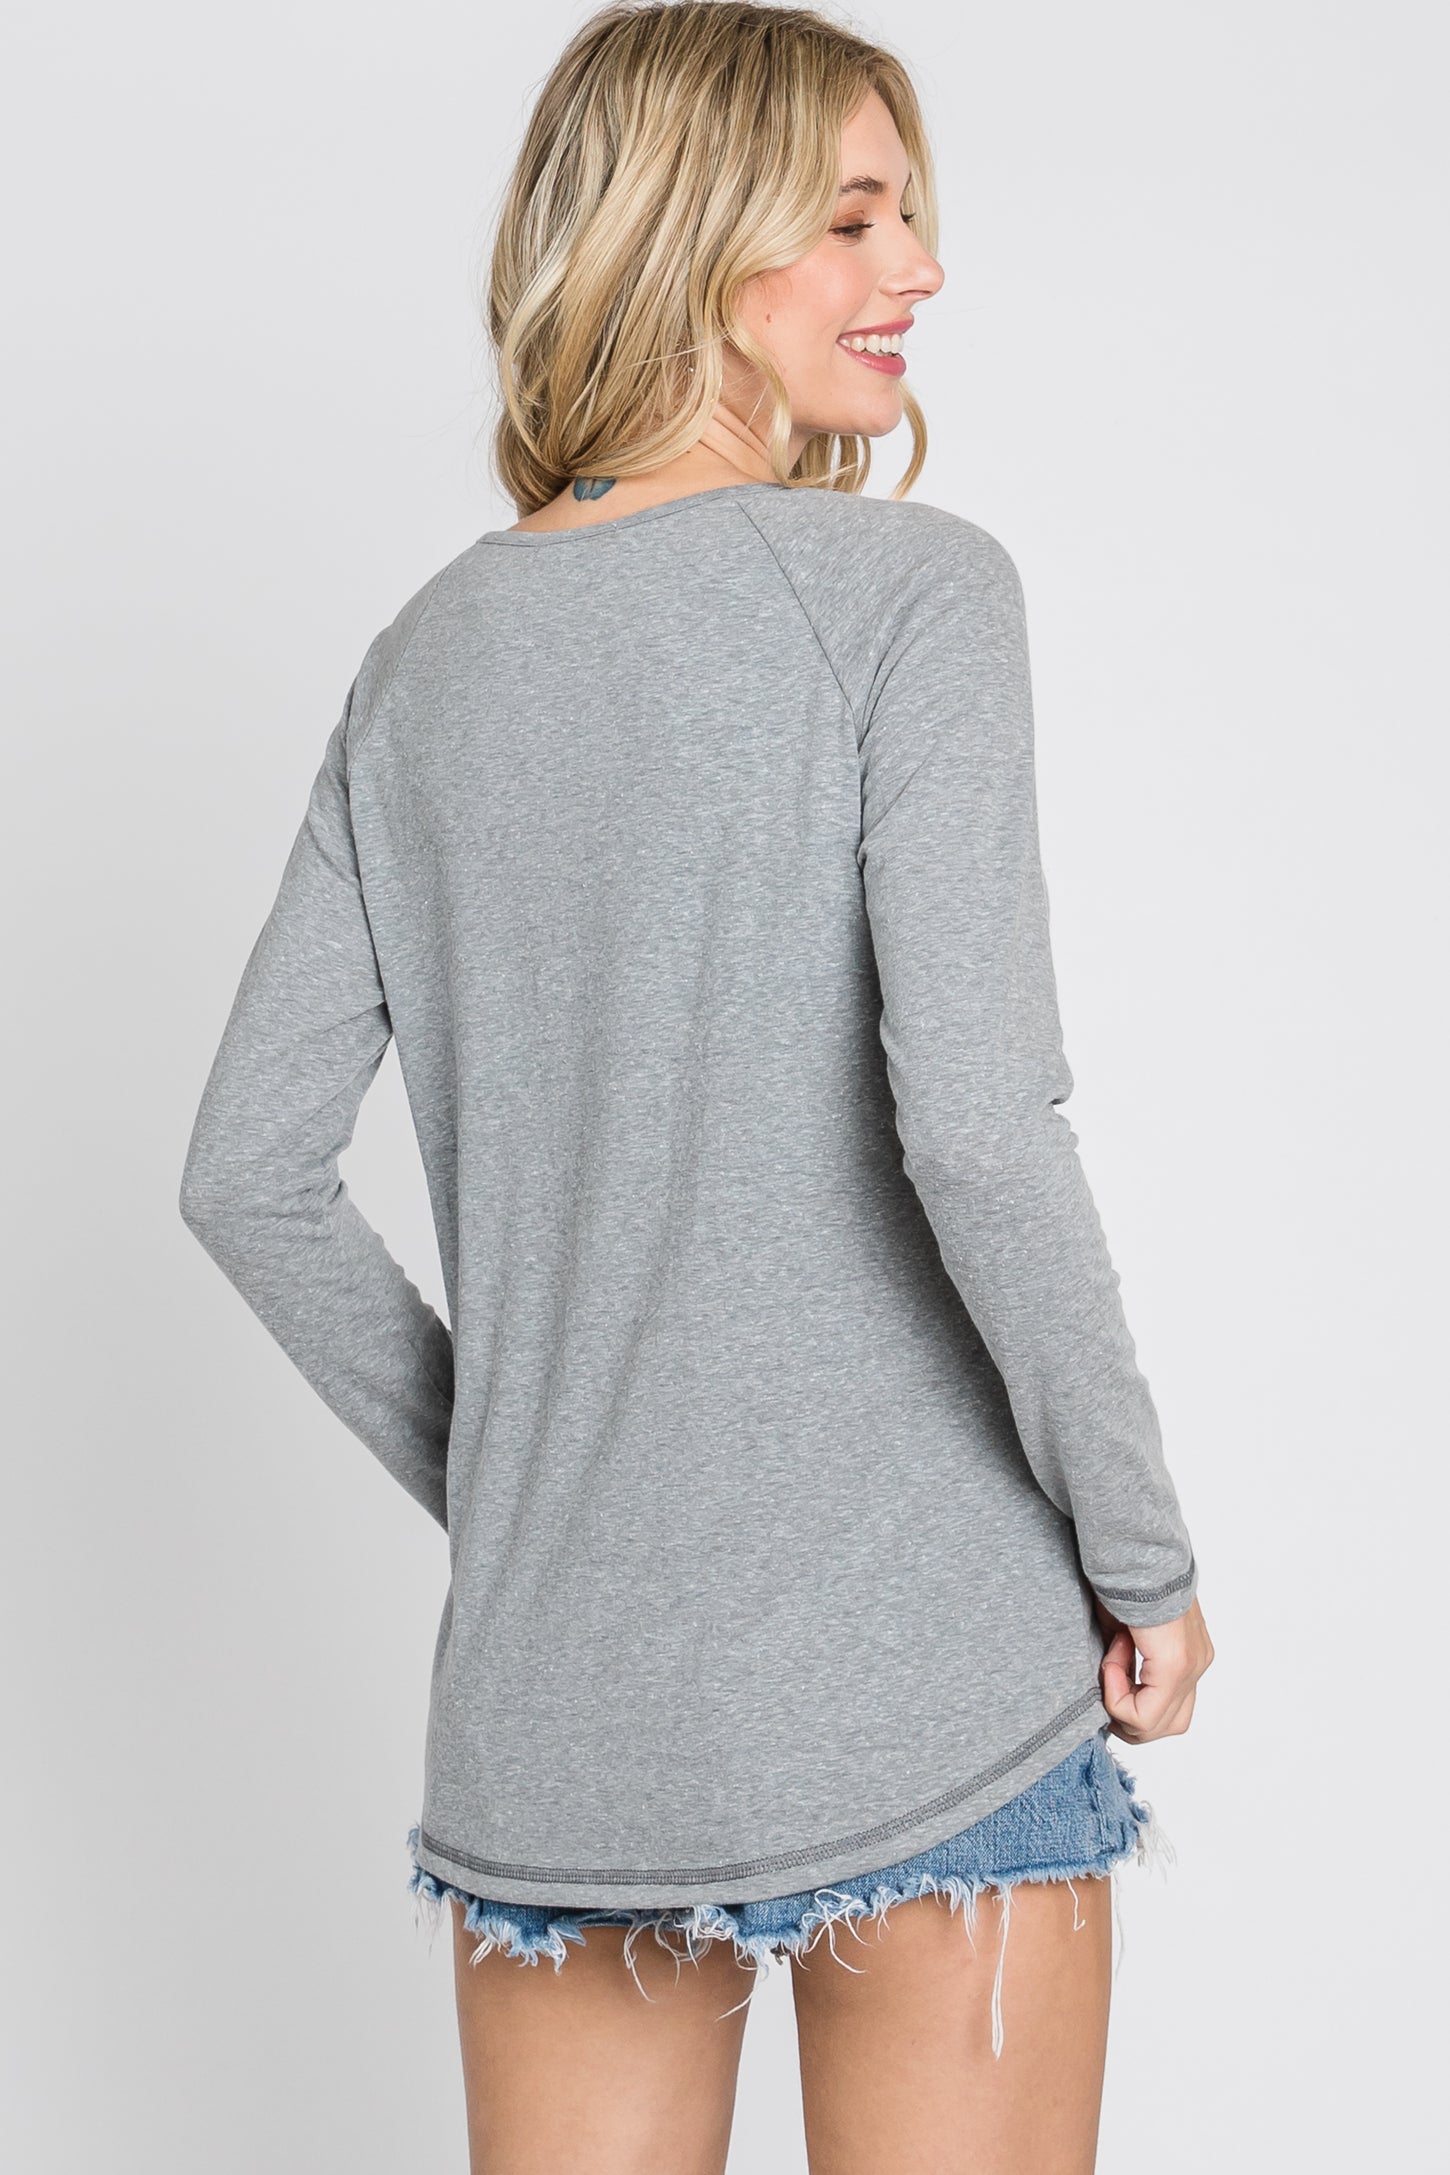 Grey Contrast Stitched Long Sleeve Top